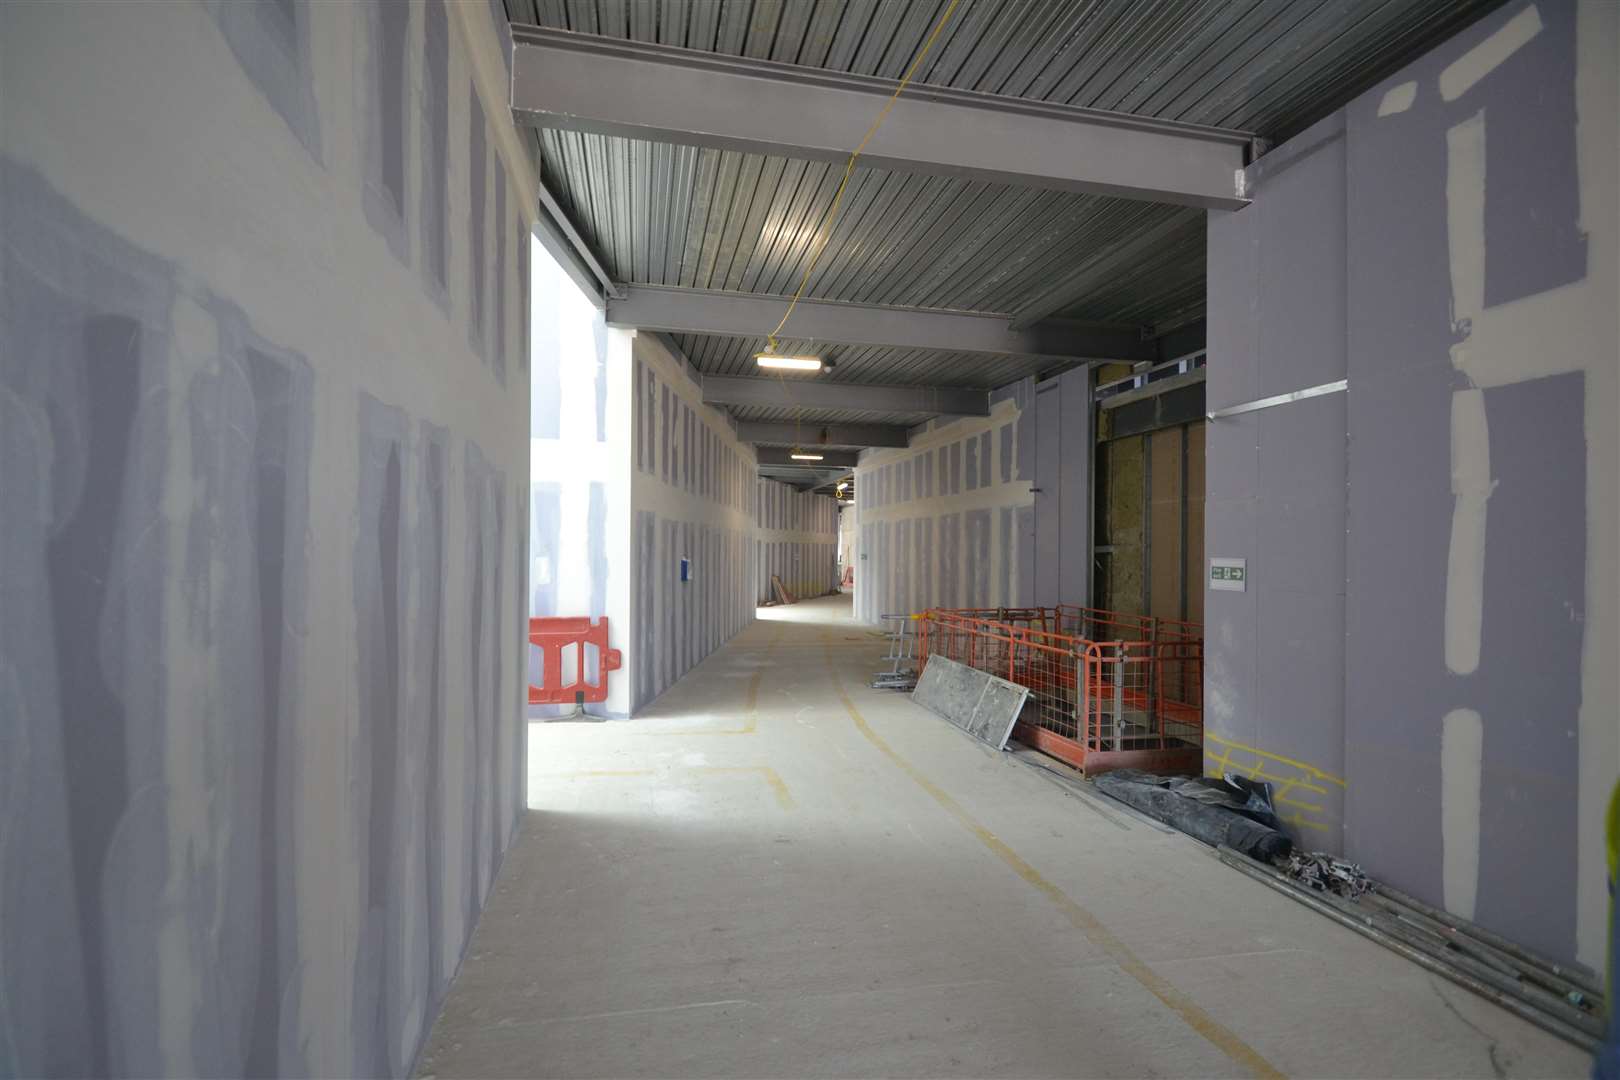 A corridor leading to the cinema screens. Picture: Steve Salter